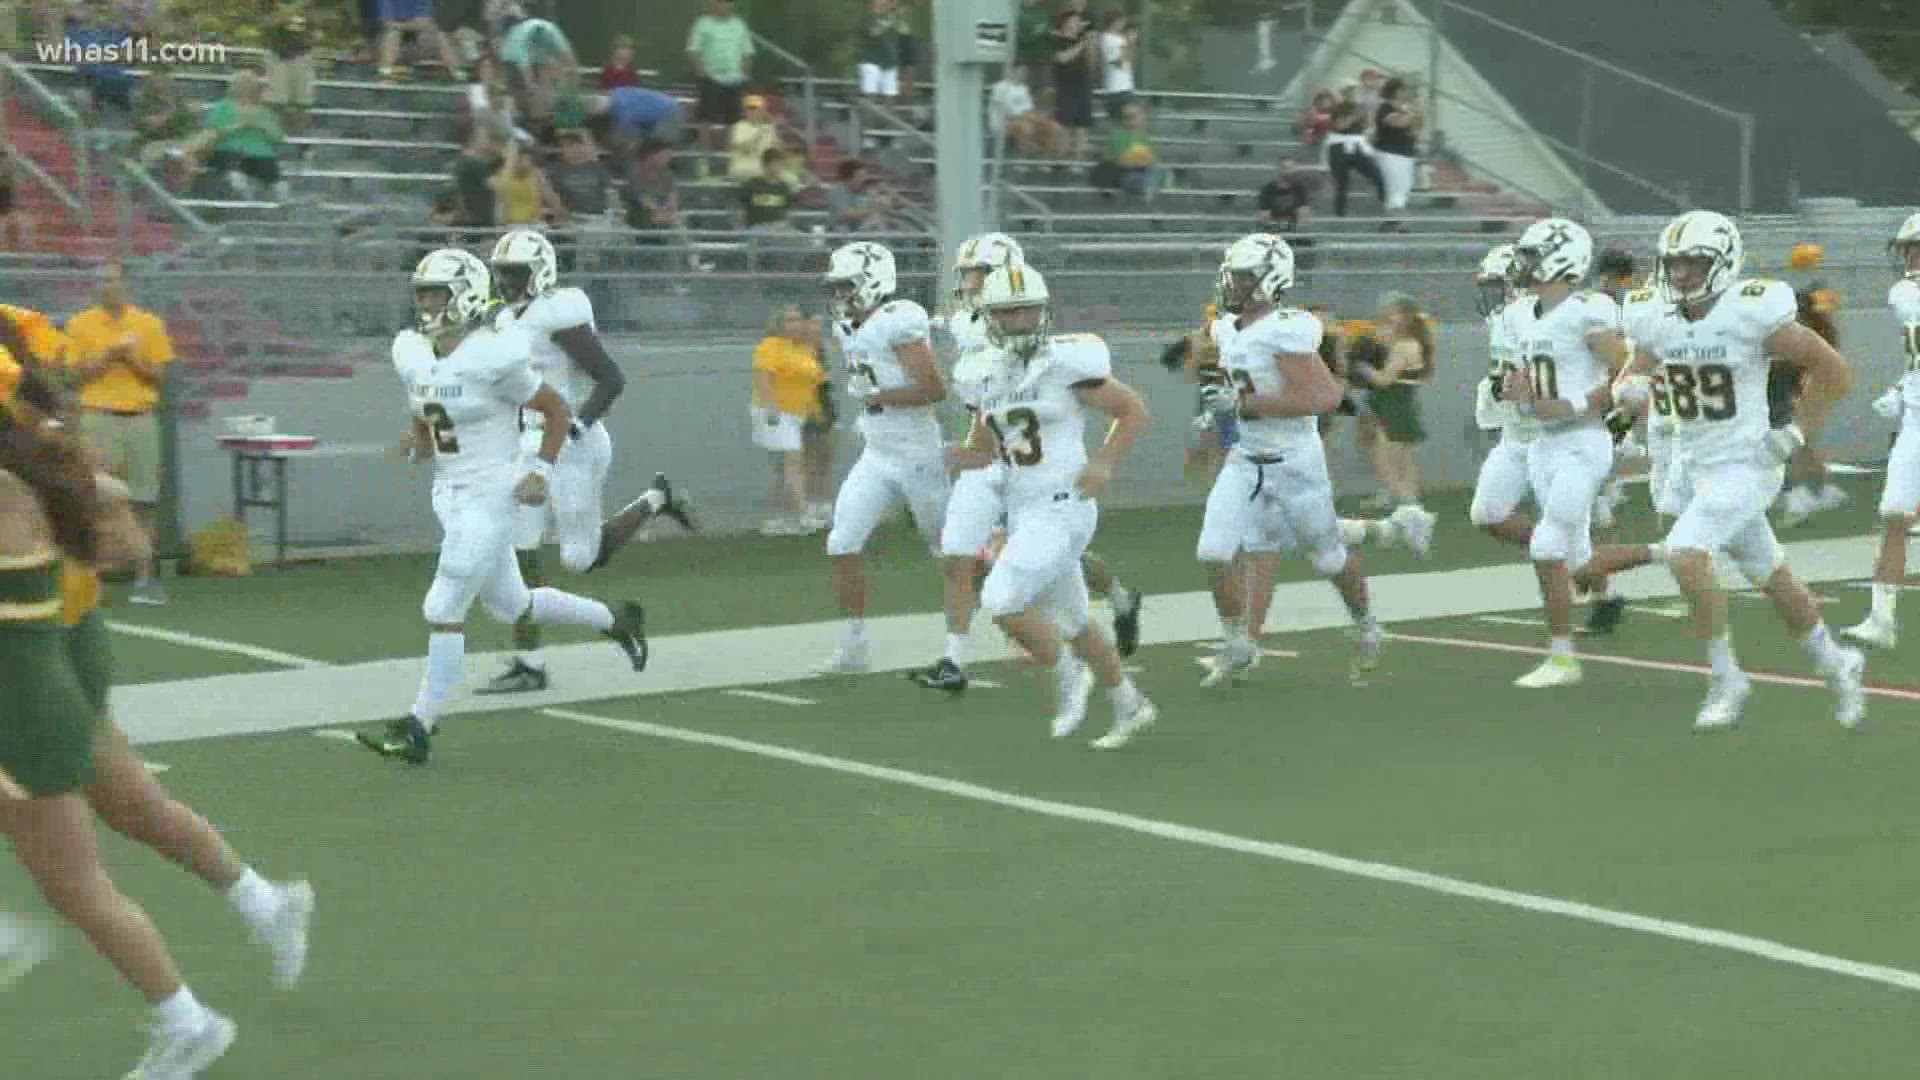 WHAS11's Tyler Greever previews the HS Gametime Game of the Week: Male Bulldogs vs. St. X Tigers